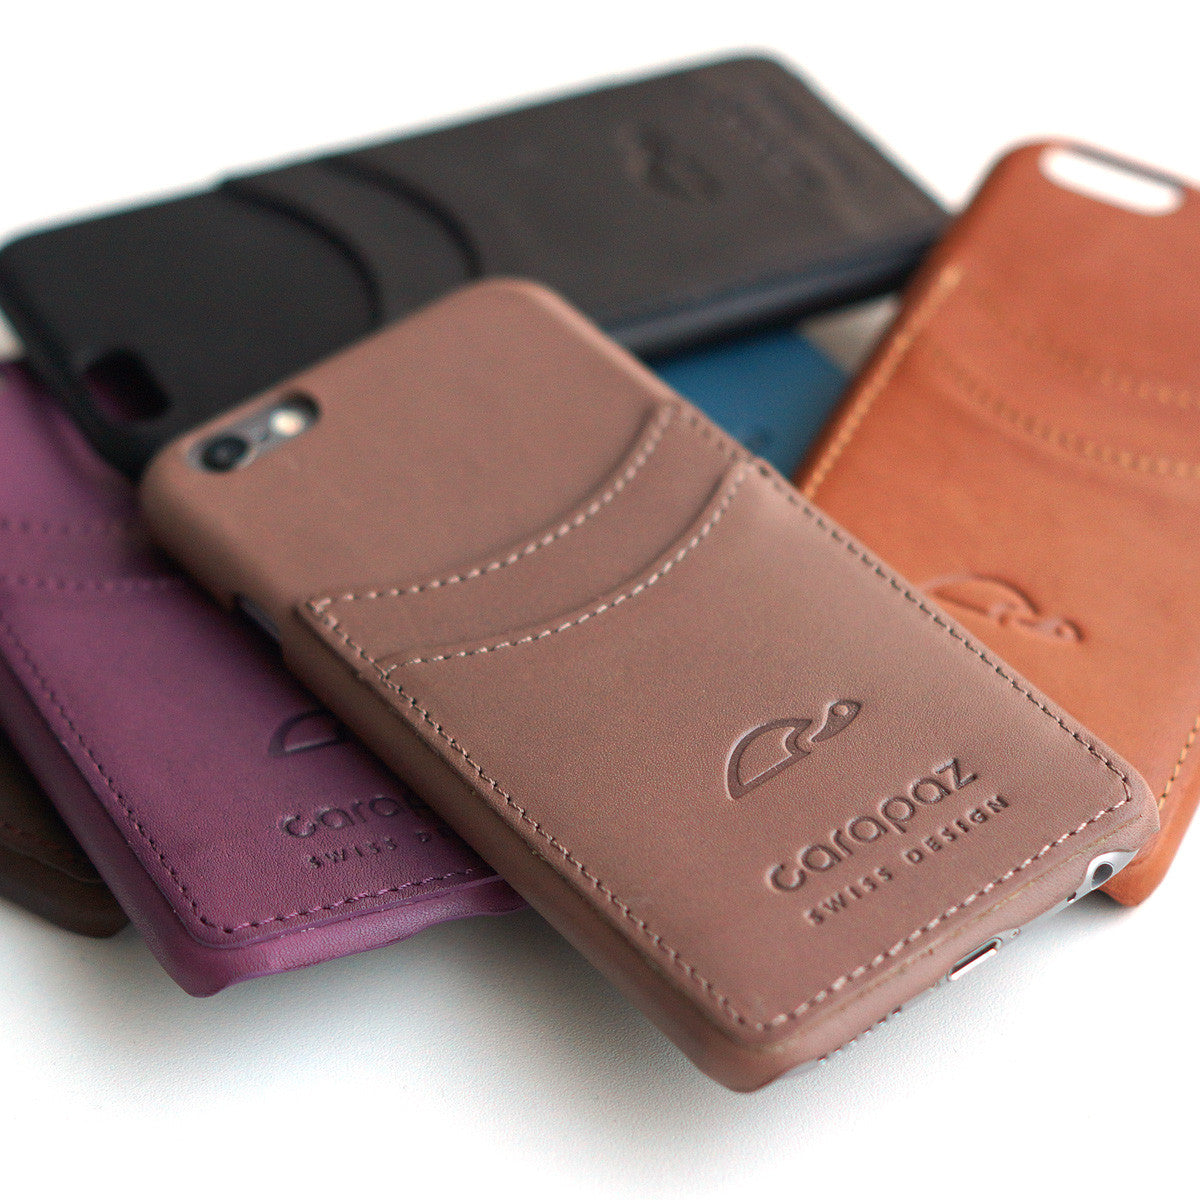 Leather covered hard shell case "Cannes" for iPhone 6 / 6S